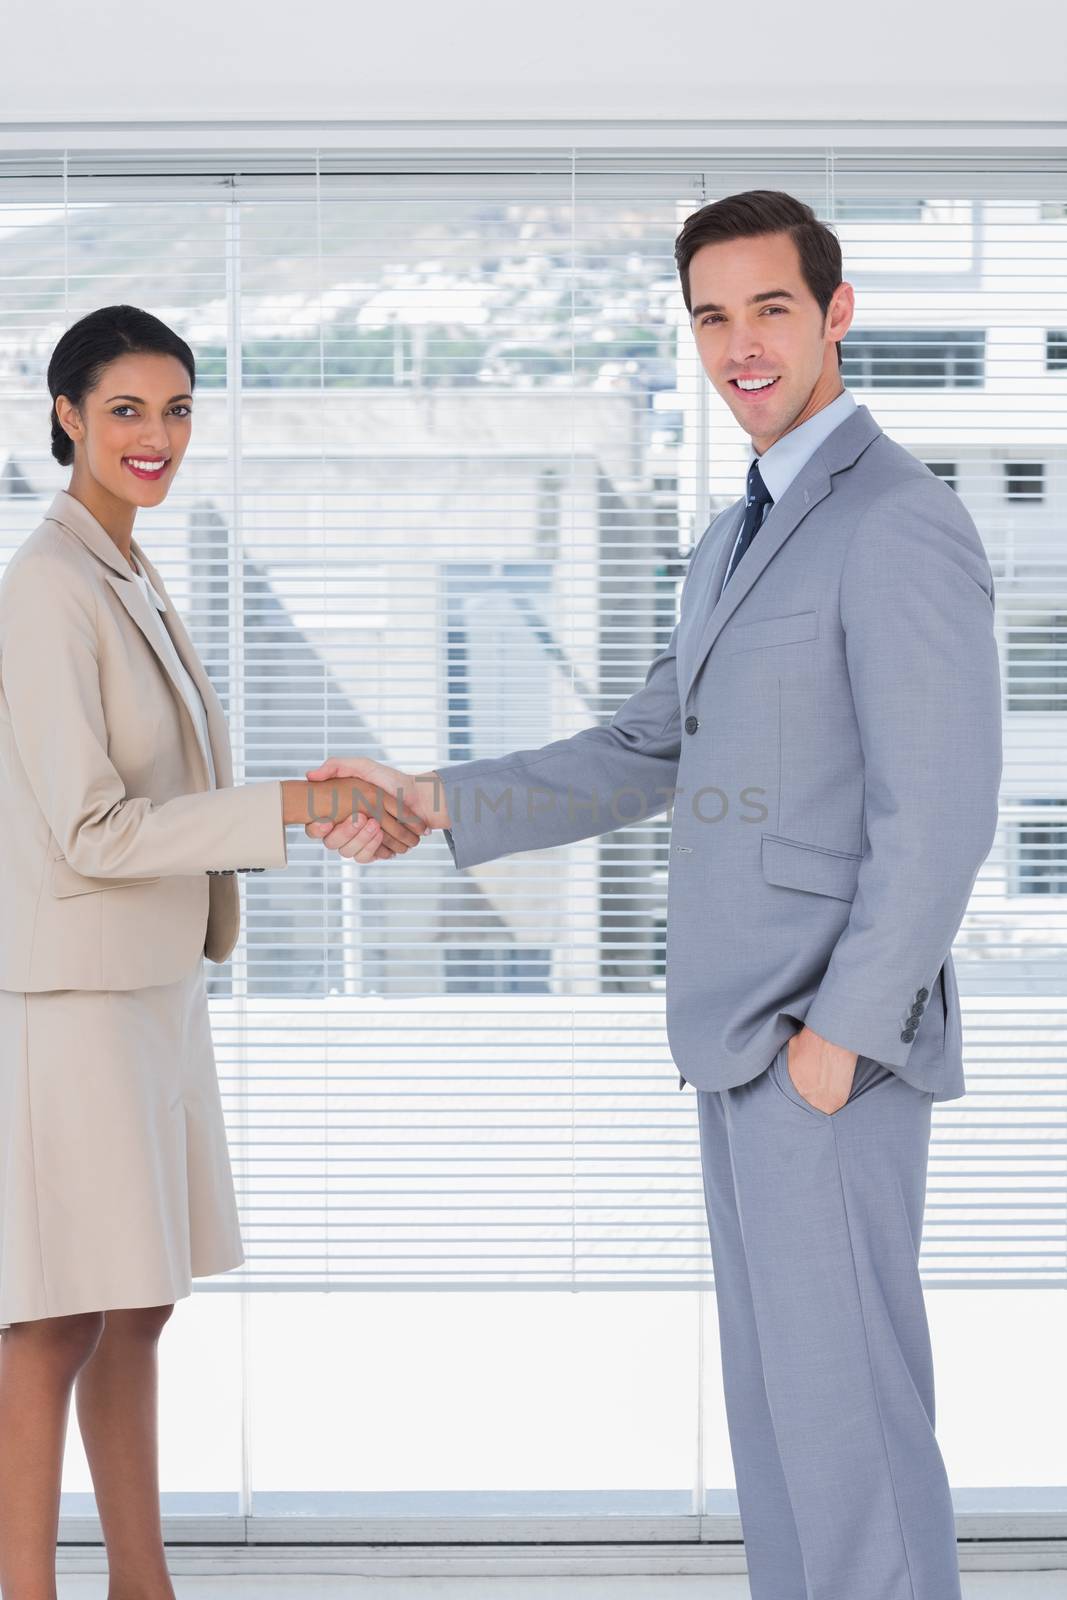 Smiling business people shaking hands in the office